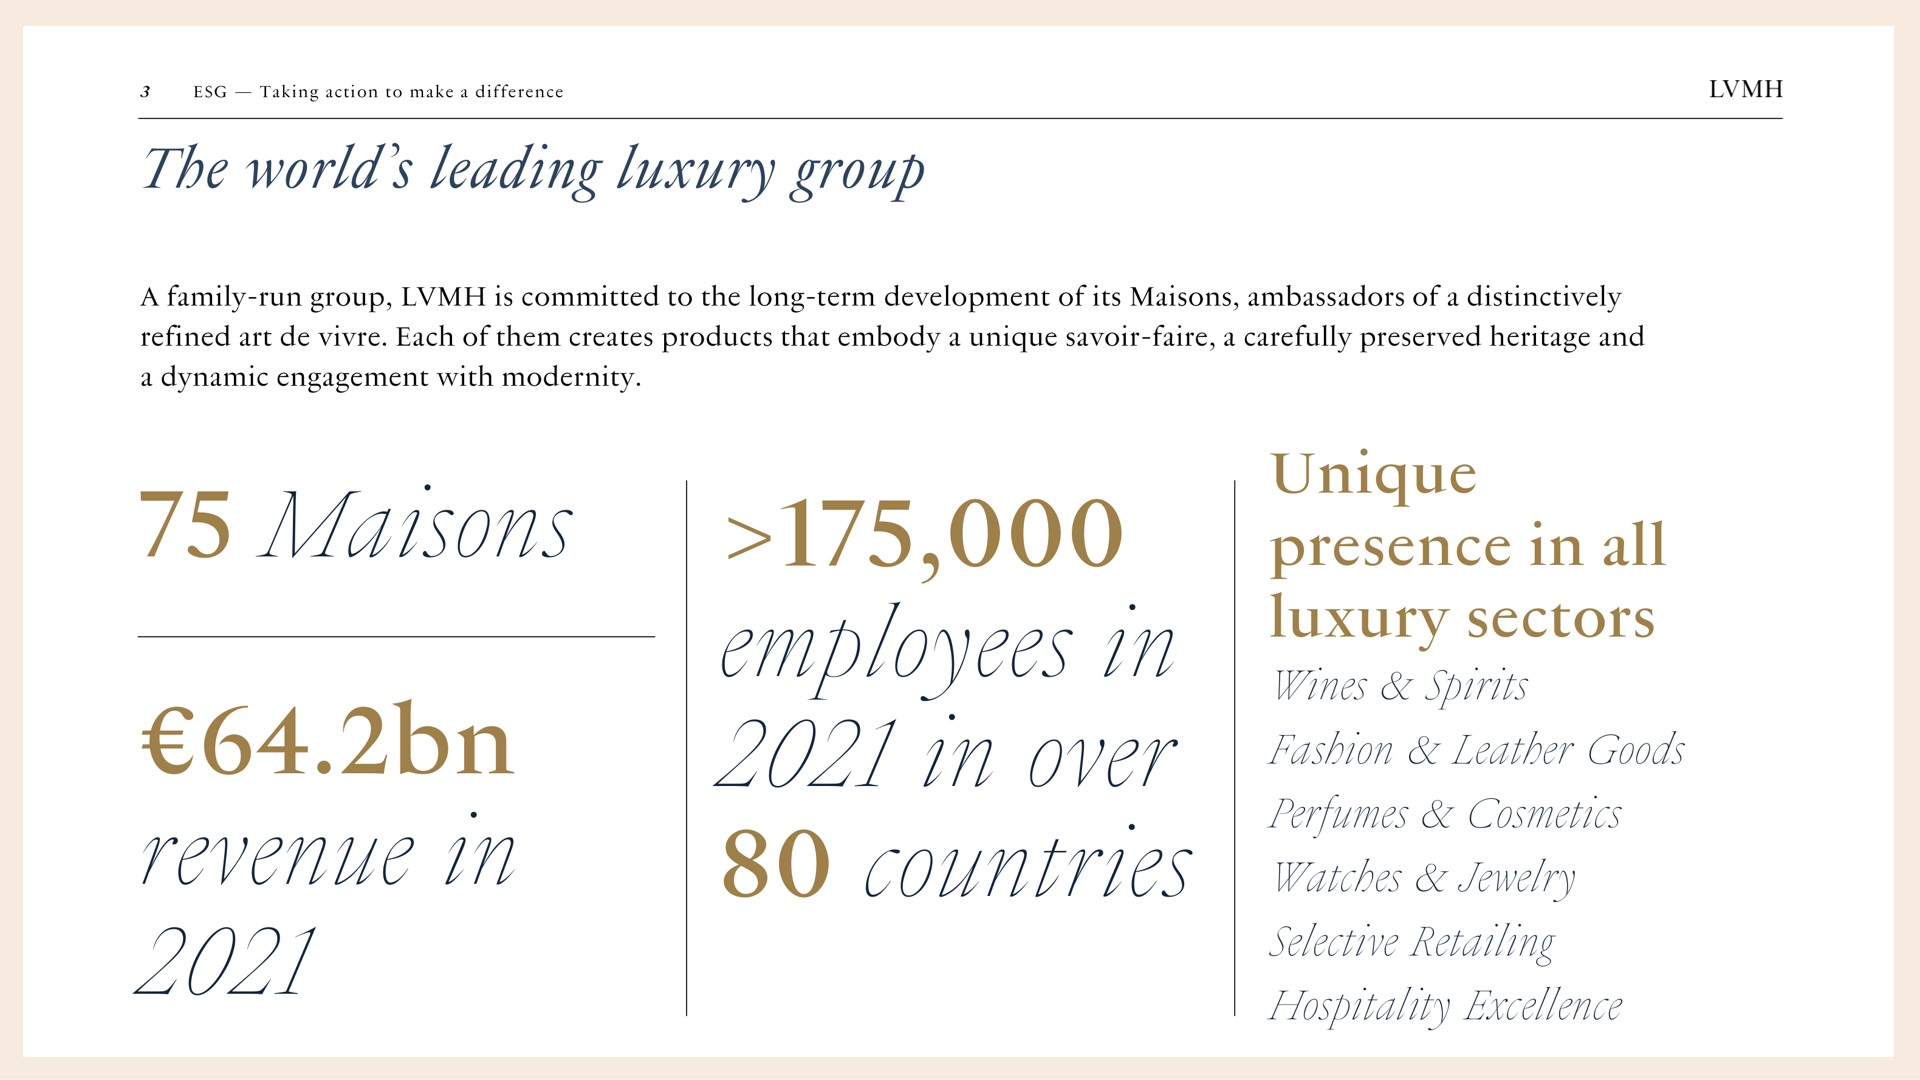 LVMH - LVMH and its Maisons are dedicated to carefully